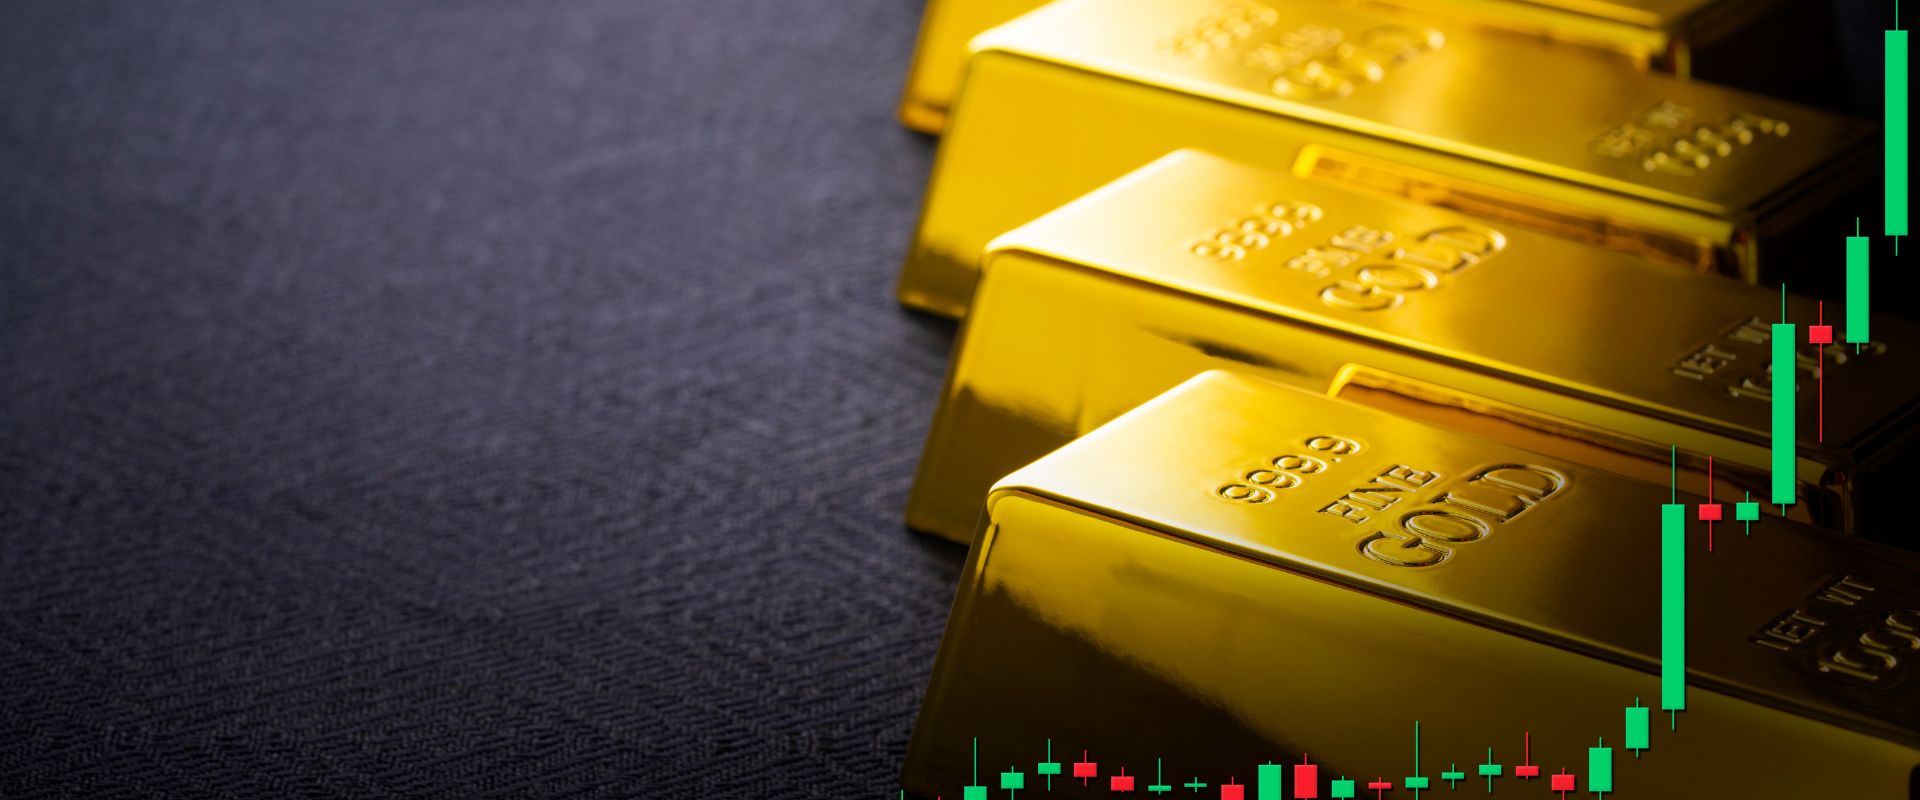 gold bars in a row with doji candlestick chart